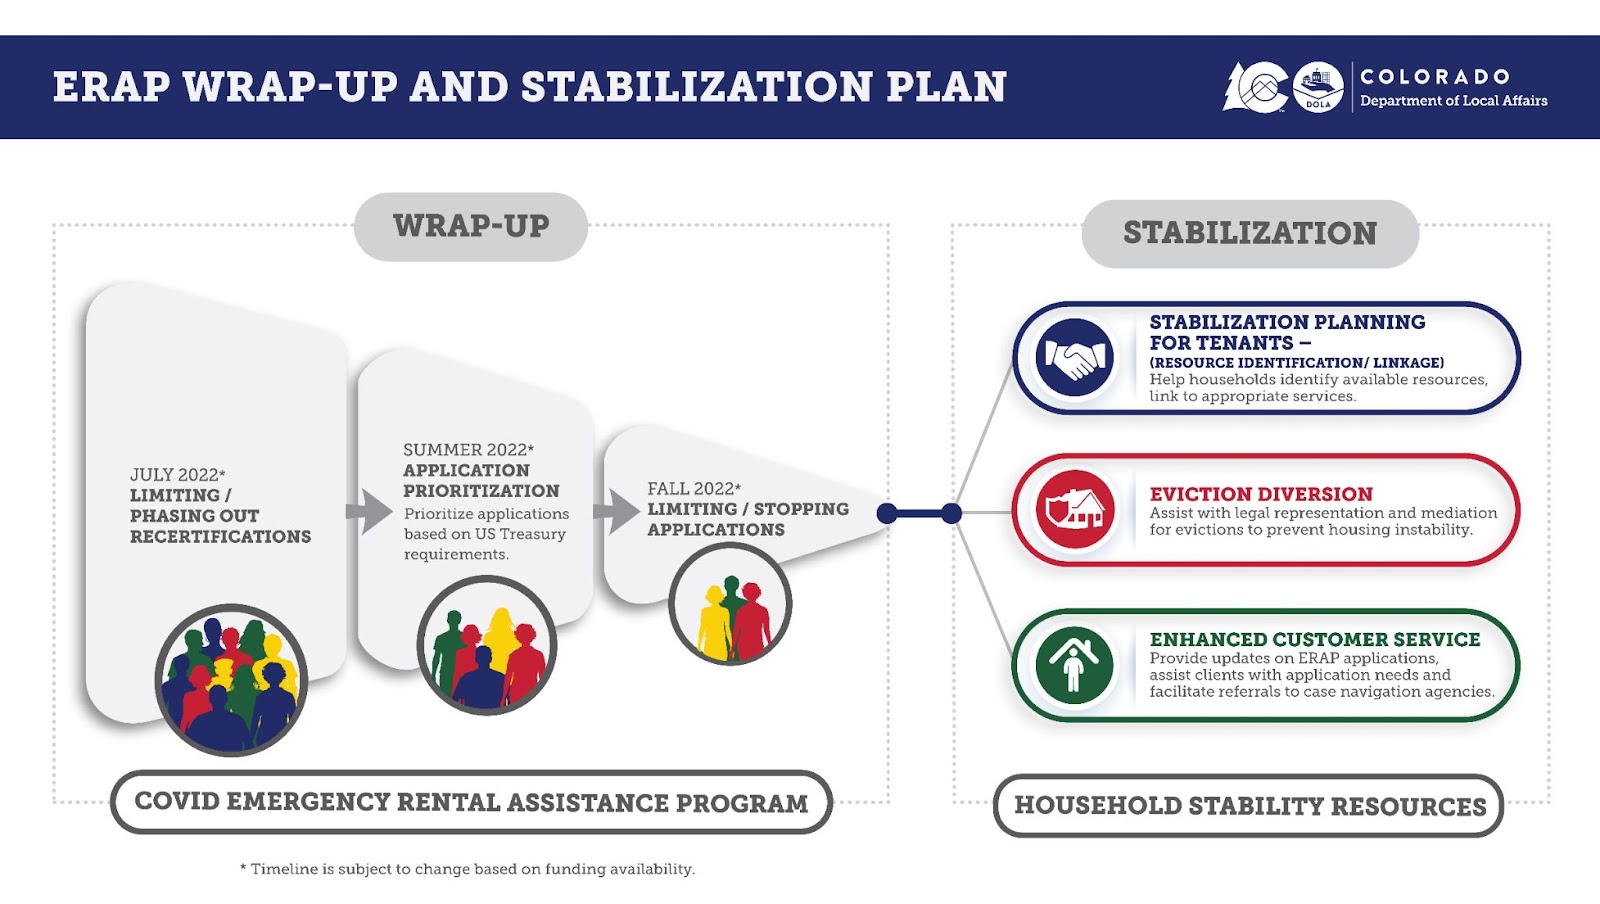 ERAP Wrap-Up and Stabilization Plan